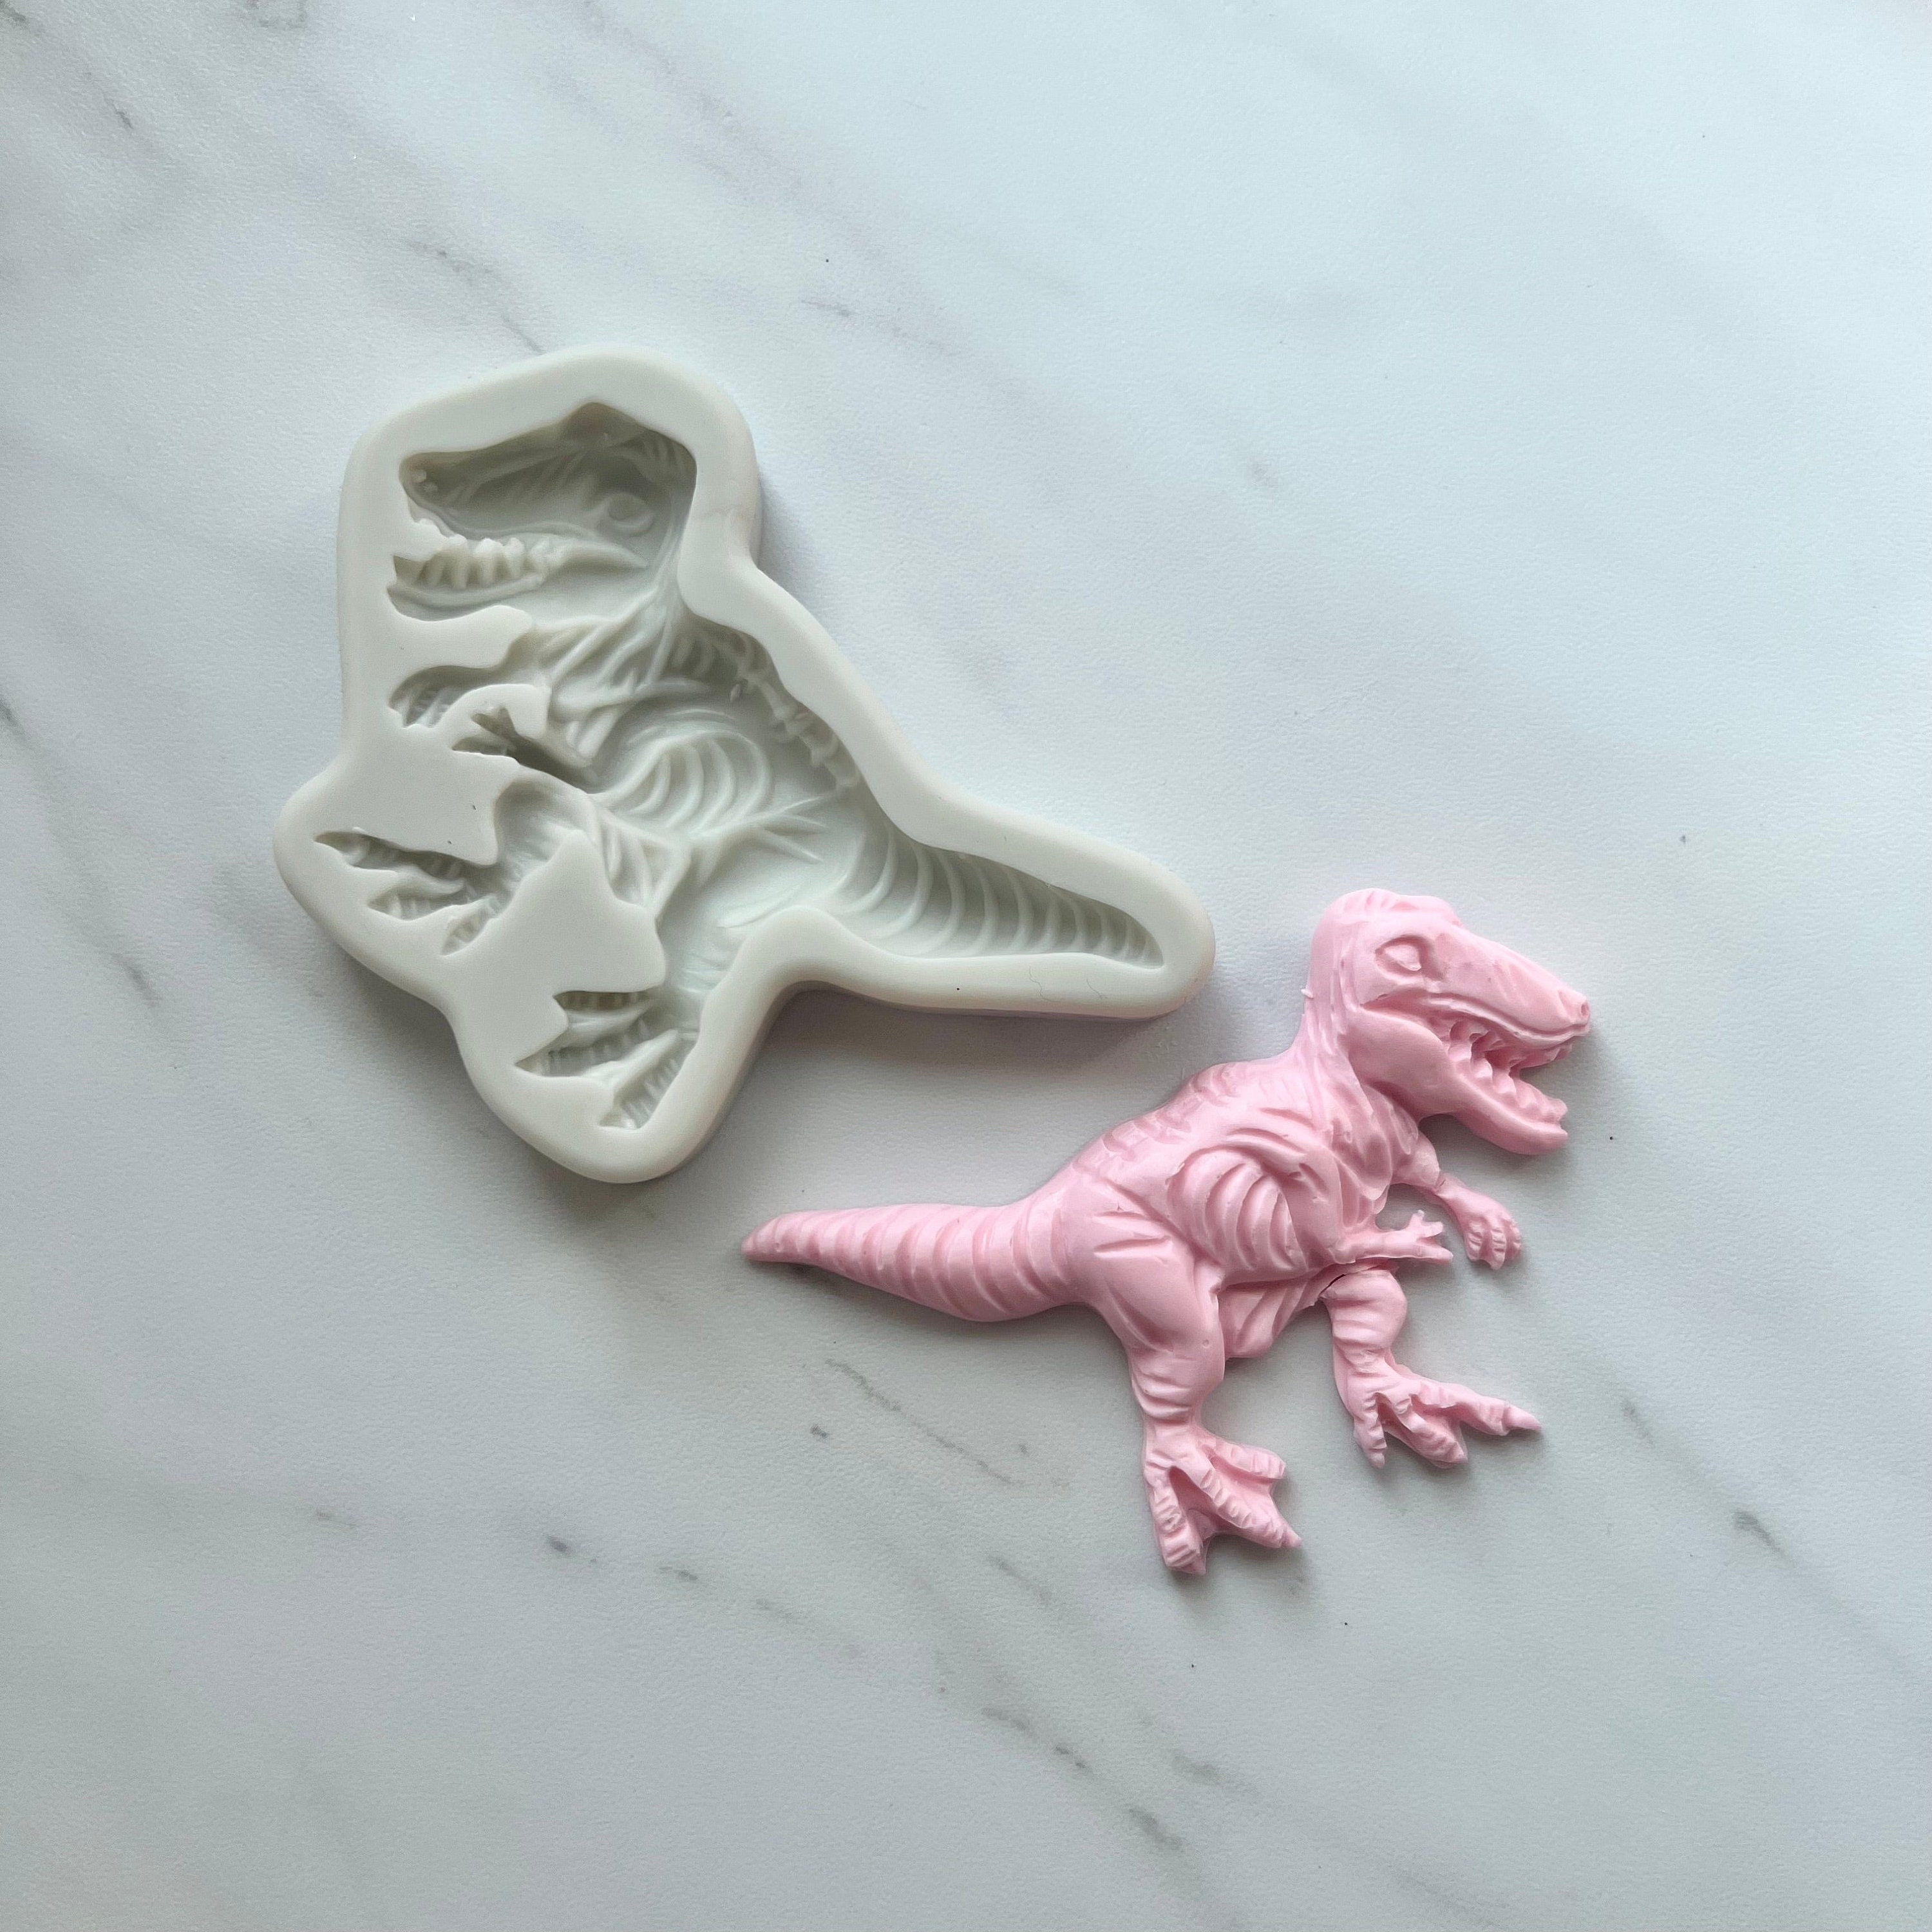 Easter Dinosaur Silicone Chocolate Mold Jurassic Period Animal Candy  Biscuit Jelly Fudge Baking Mould Cake Decor Ice Tray Gifts